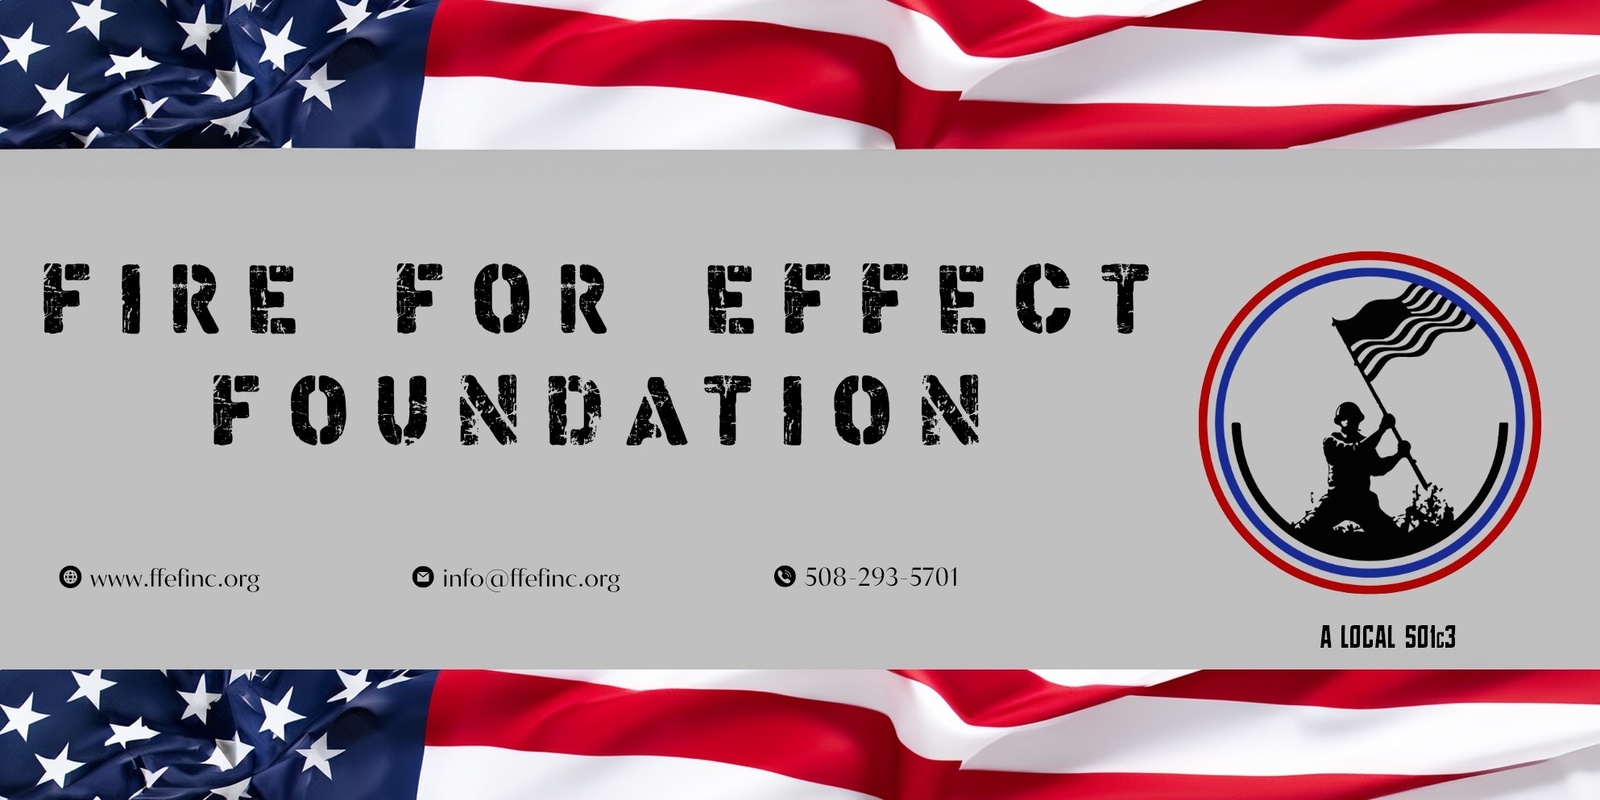 Fire For Effect Foundation Inc.'s banner